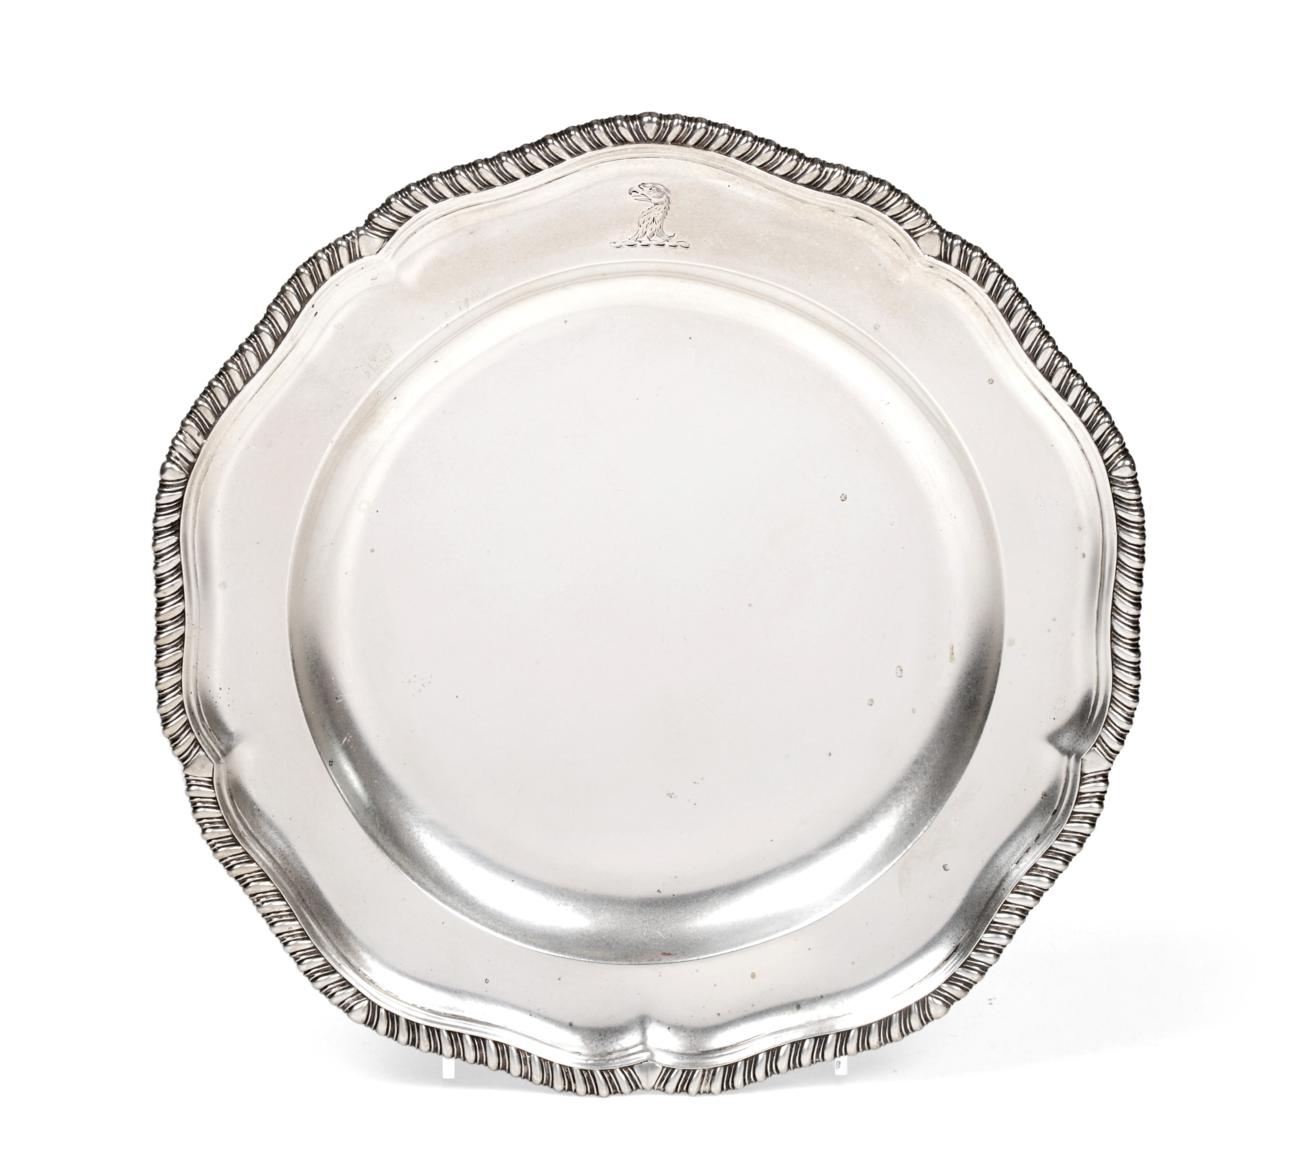 A Victorian Silver Dinner-Plate, by Robert Garrard, London, 1865, shaped circular and with gadrooned